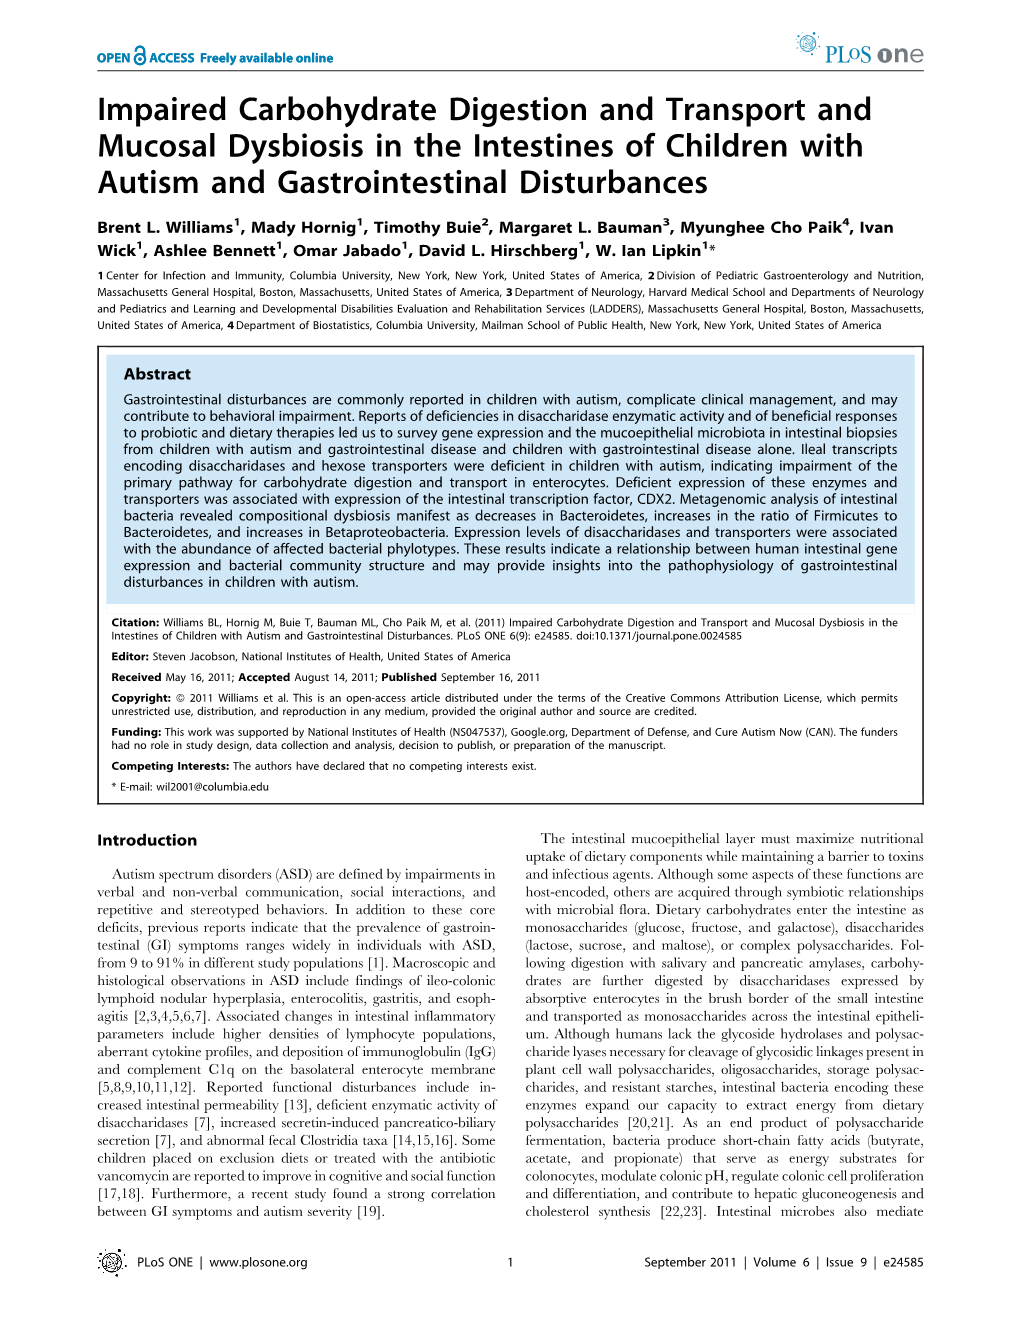 Impaired Carbohydrate Digestion and Transport and Mucosal Dysbiosis in the Intestines of Children with Autism and Gastrointestinal Disturbances